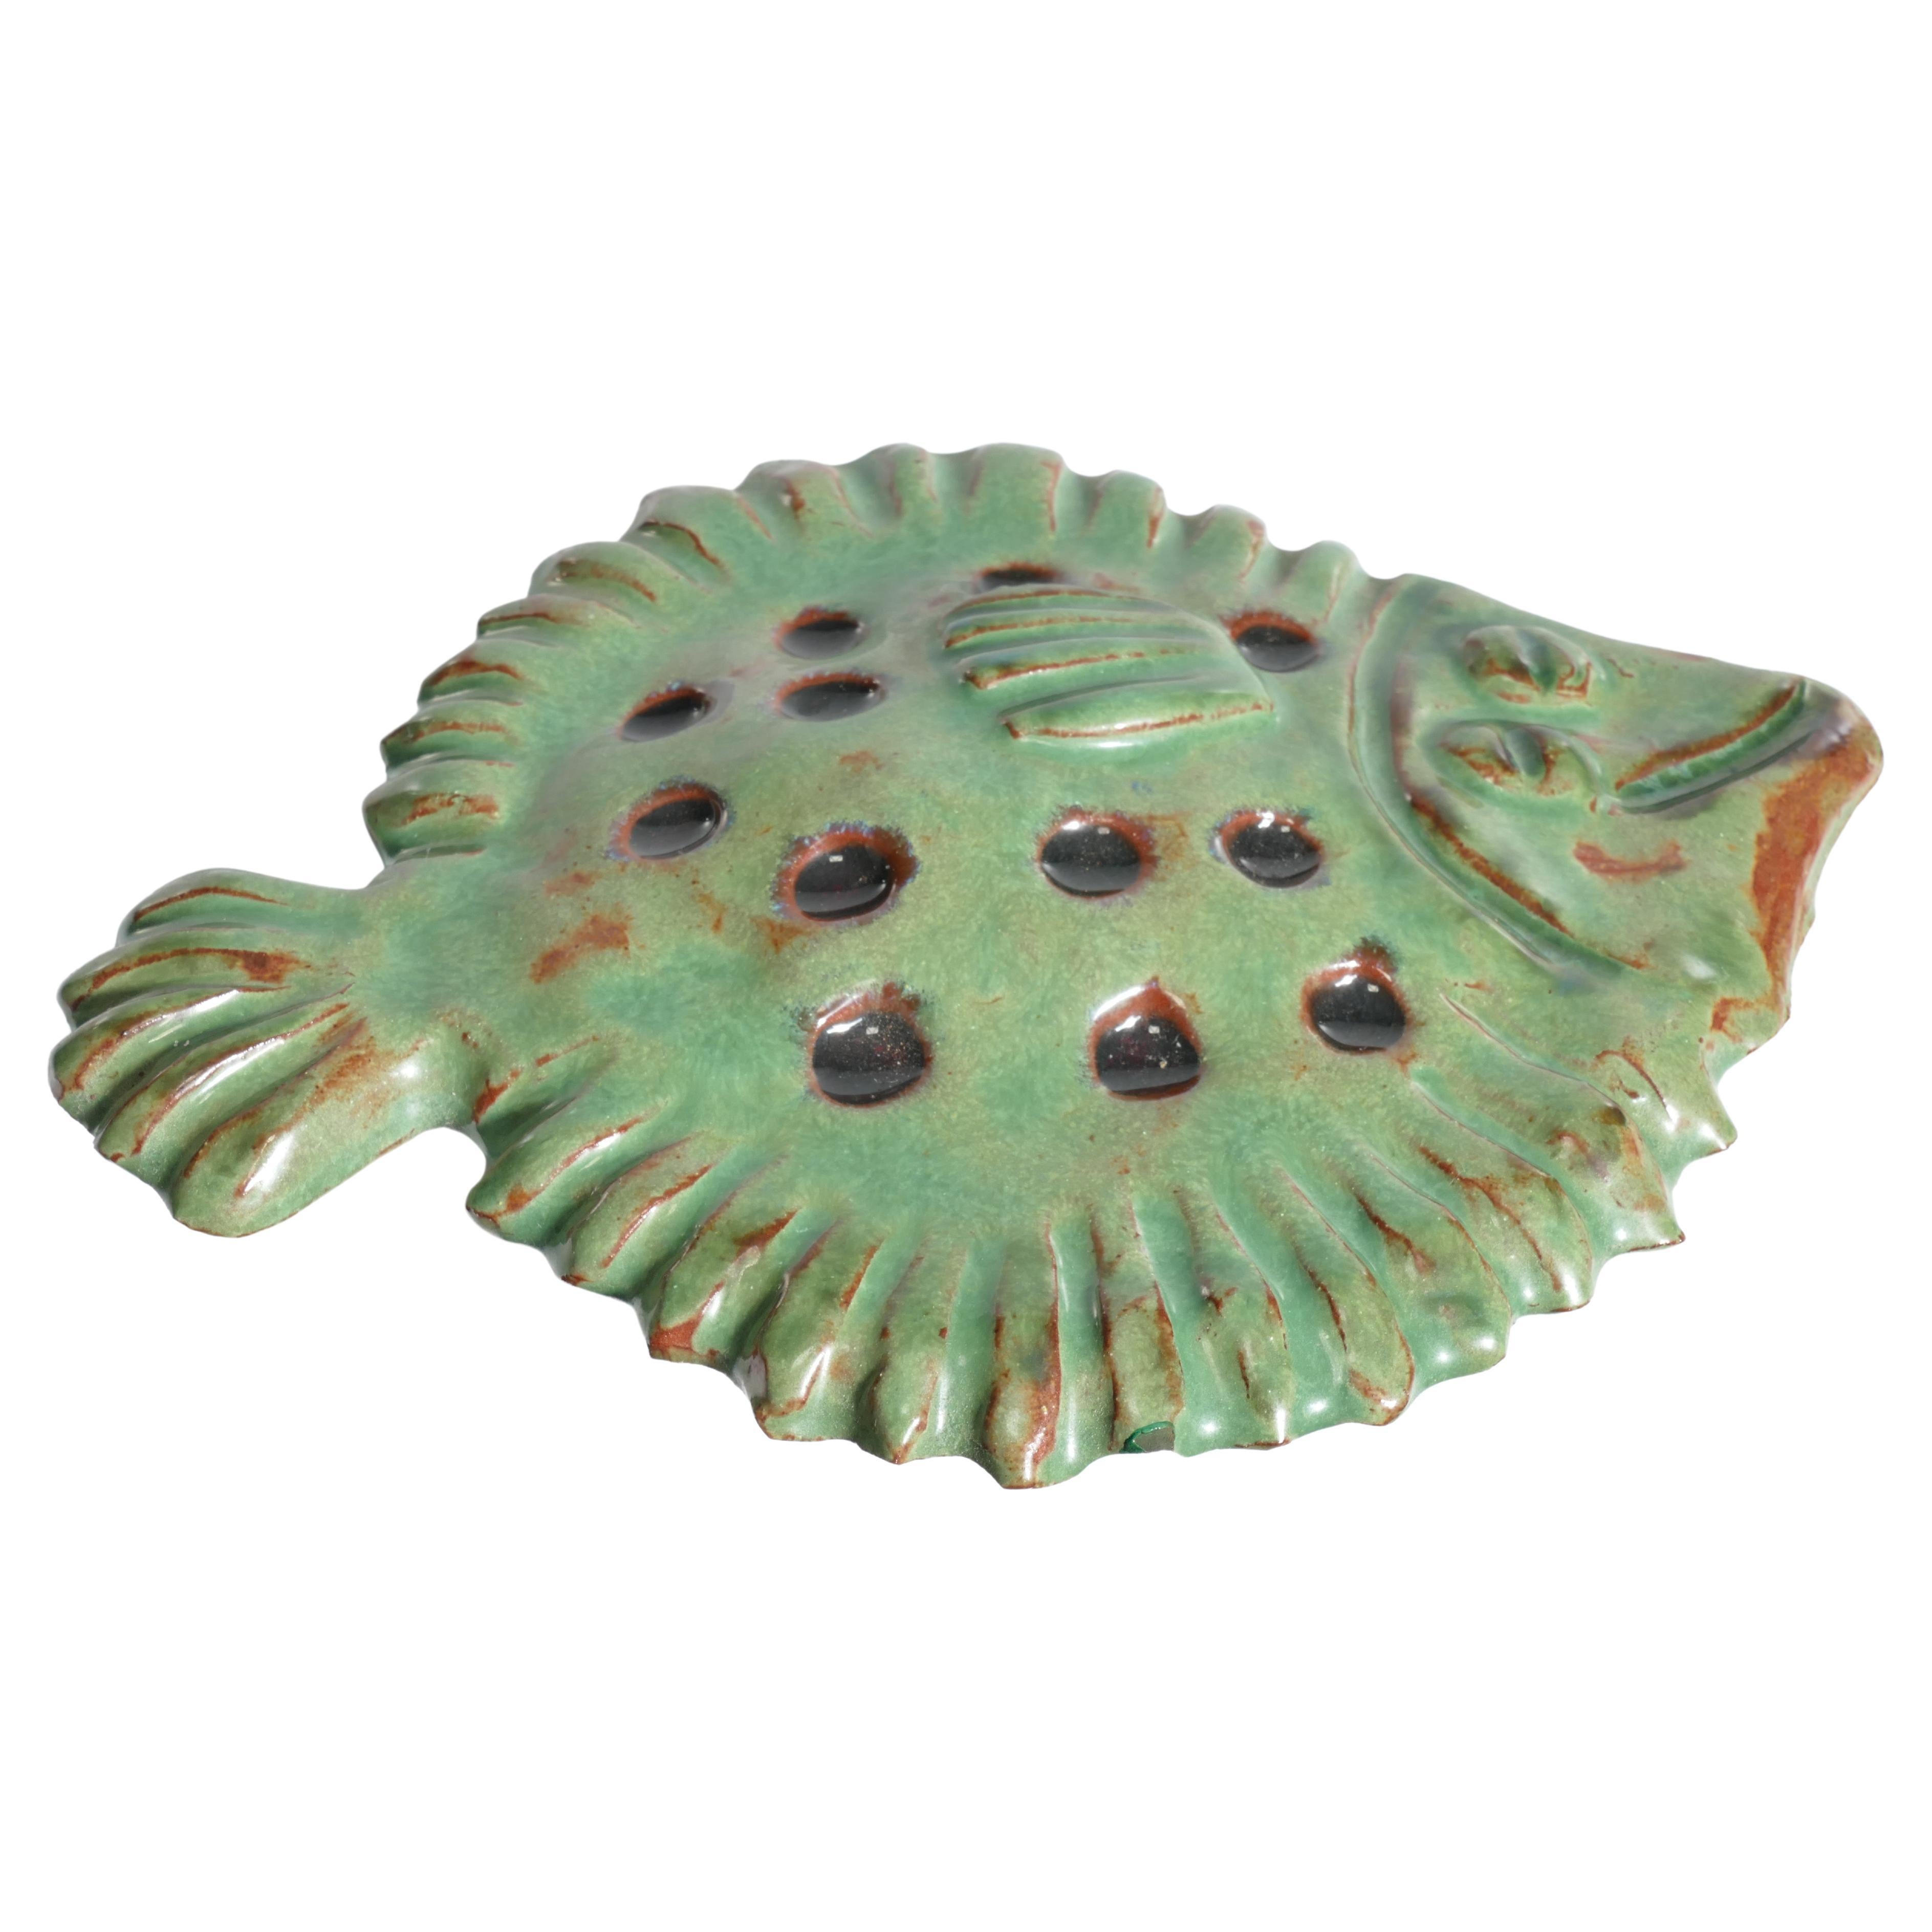 This is a playful and unique vintage green ceramic flounder is handmade by Allan Hellman in Sweden 1967

Allan Hellman (1904-1982) is an ceramic artist hailing from the coastal town Lysekil on the west coast of Sweden. With a passion for clay and a